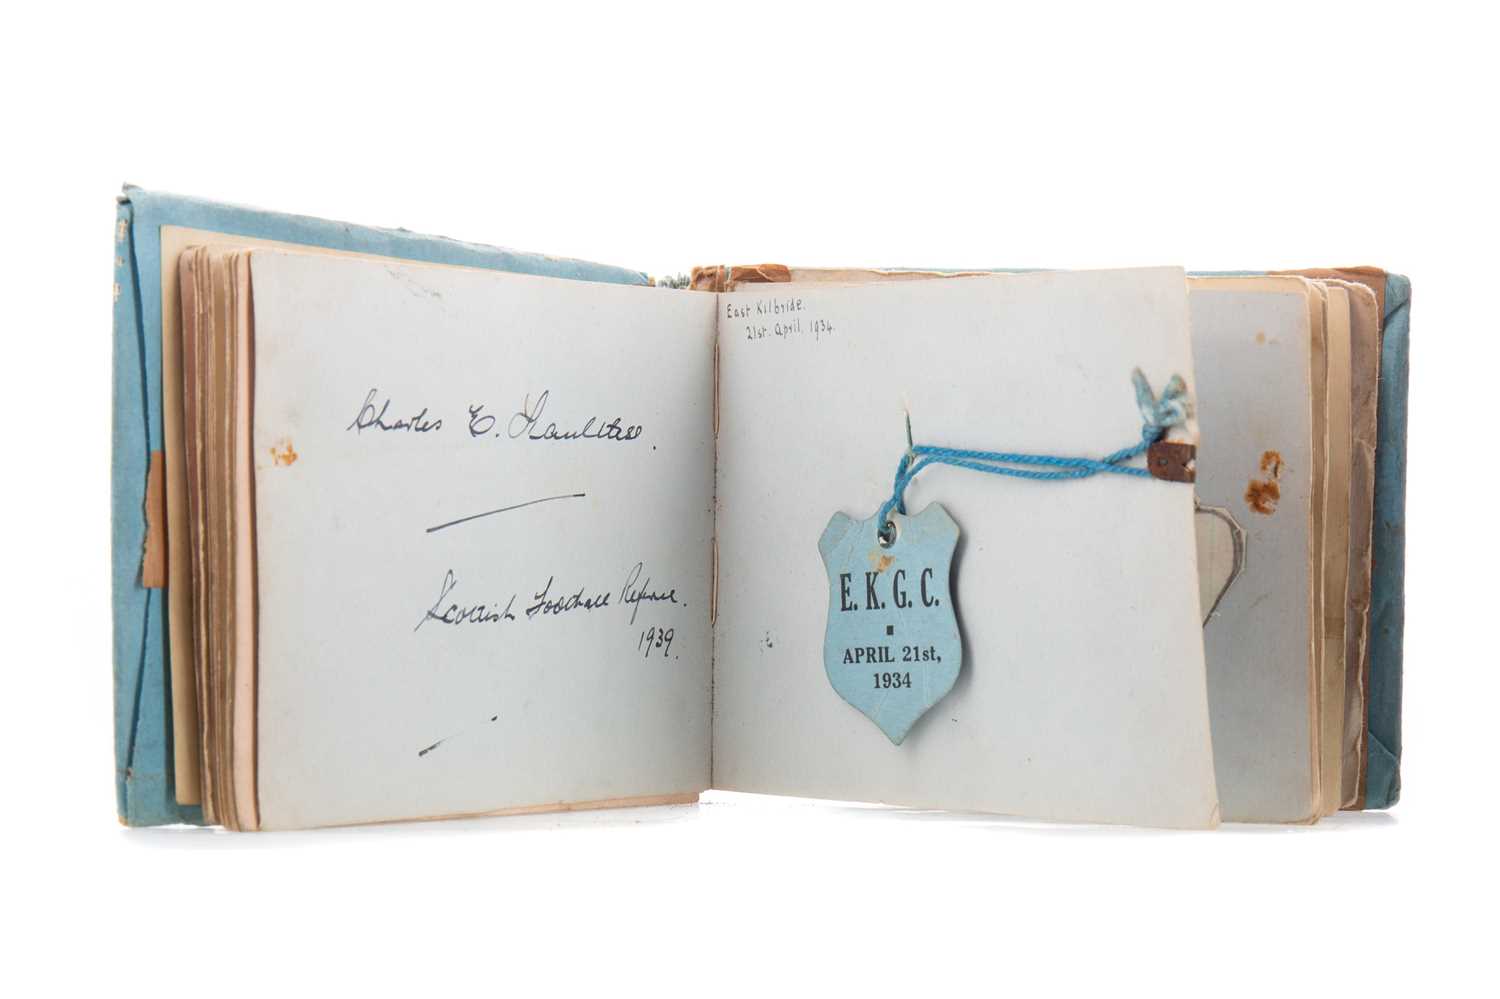 Lot 1515 - AN EARLY-MID 20TH CENTURY SPORTING AUTOGRAPH BOOK